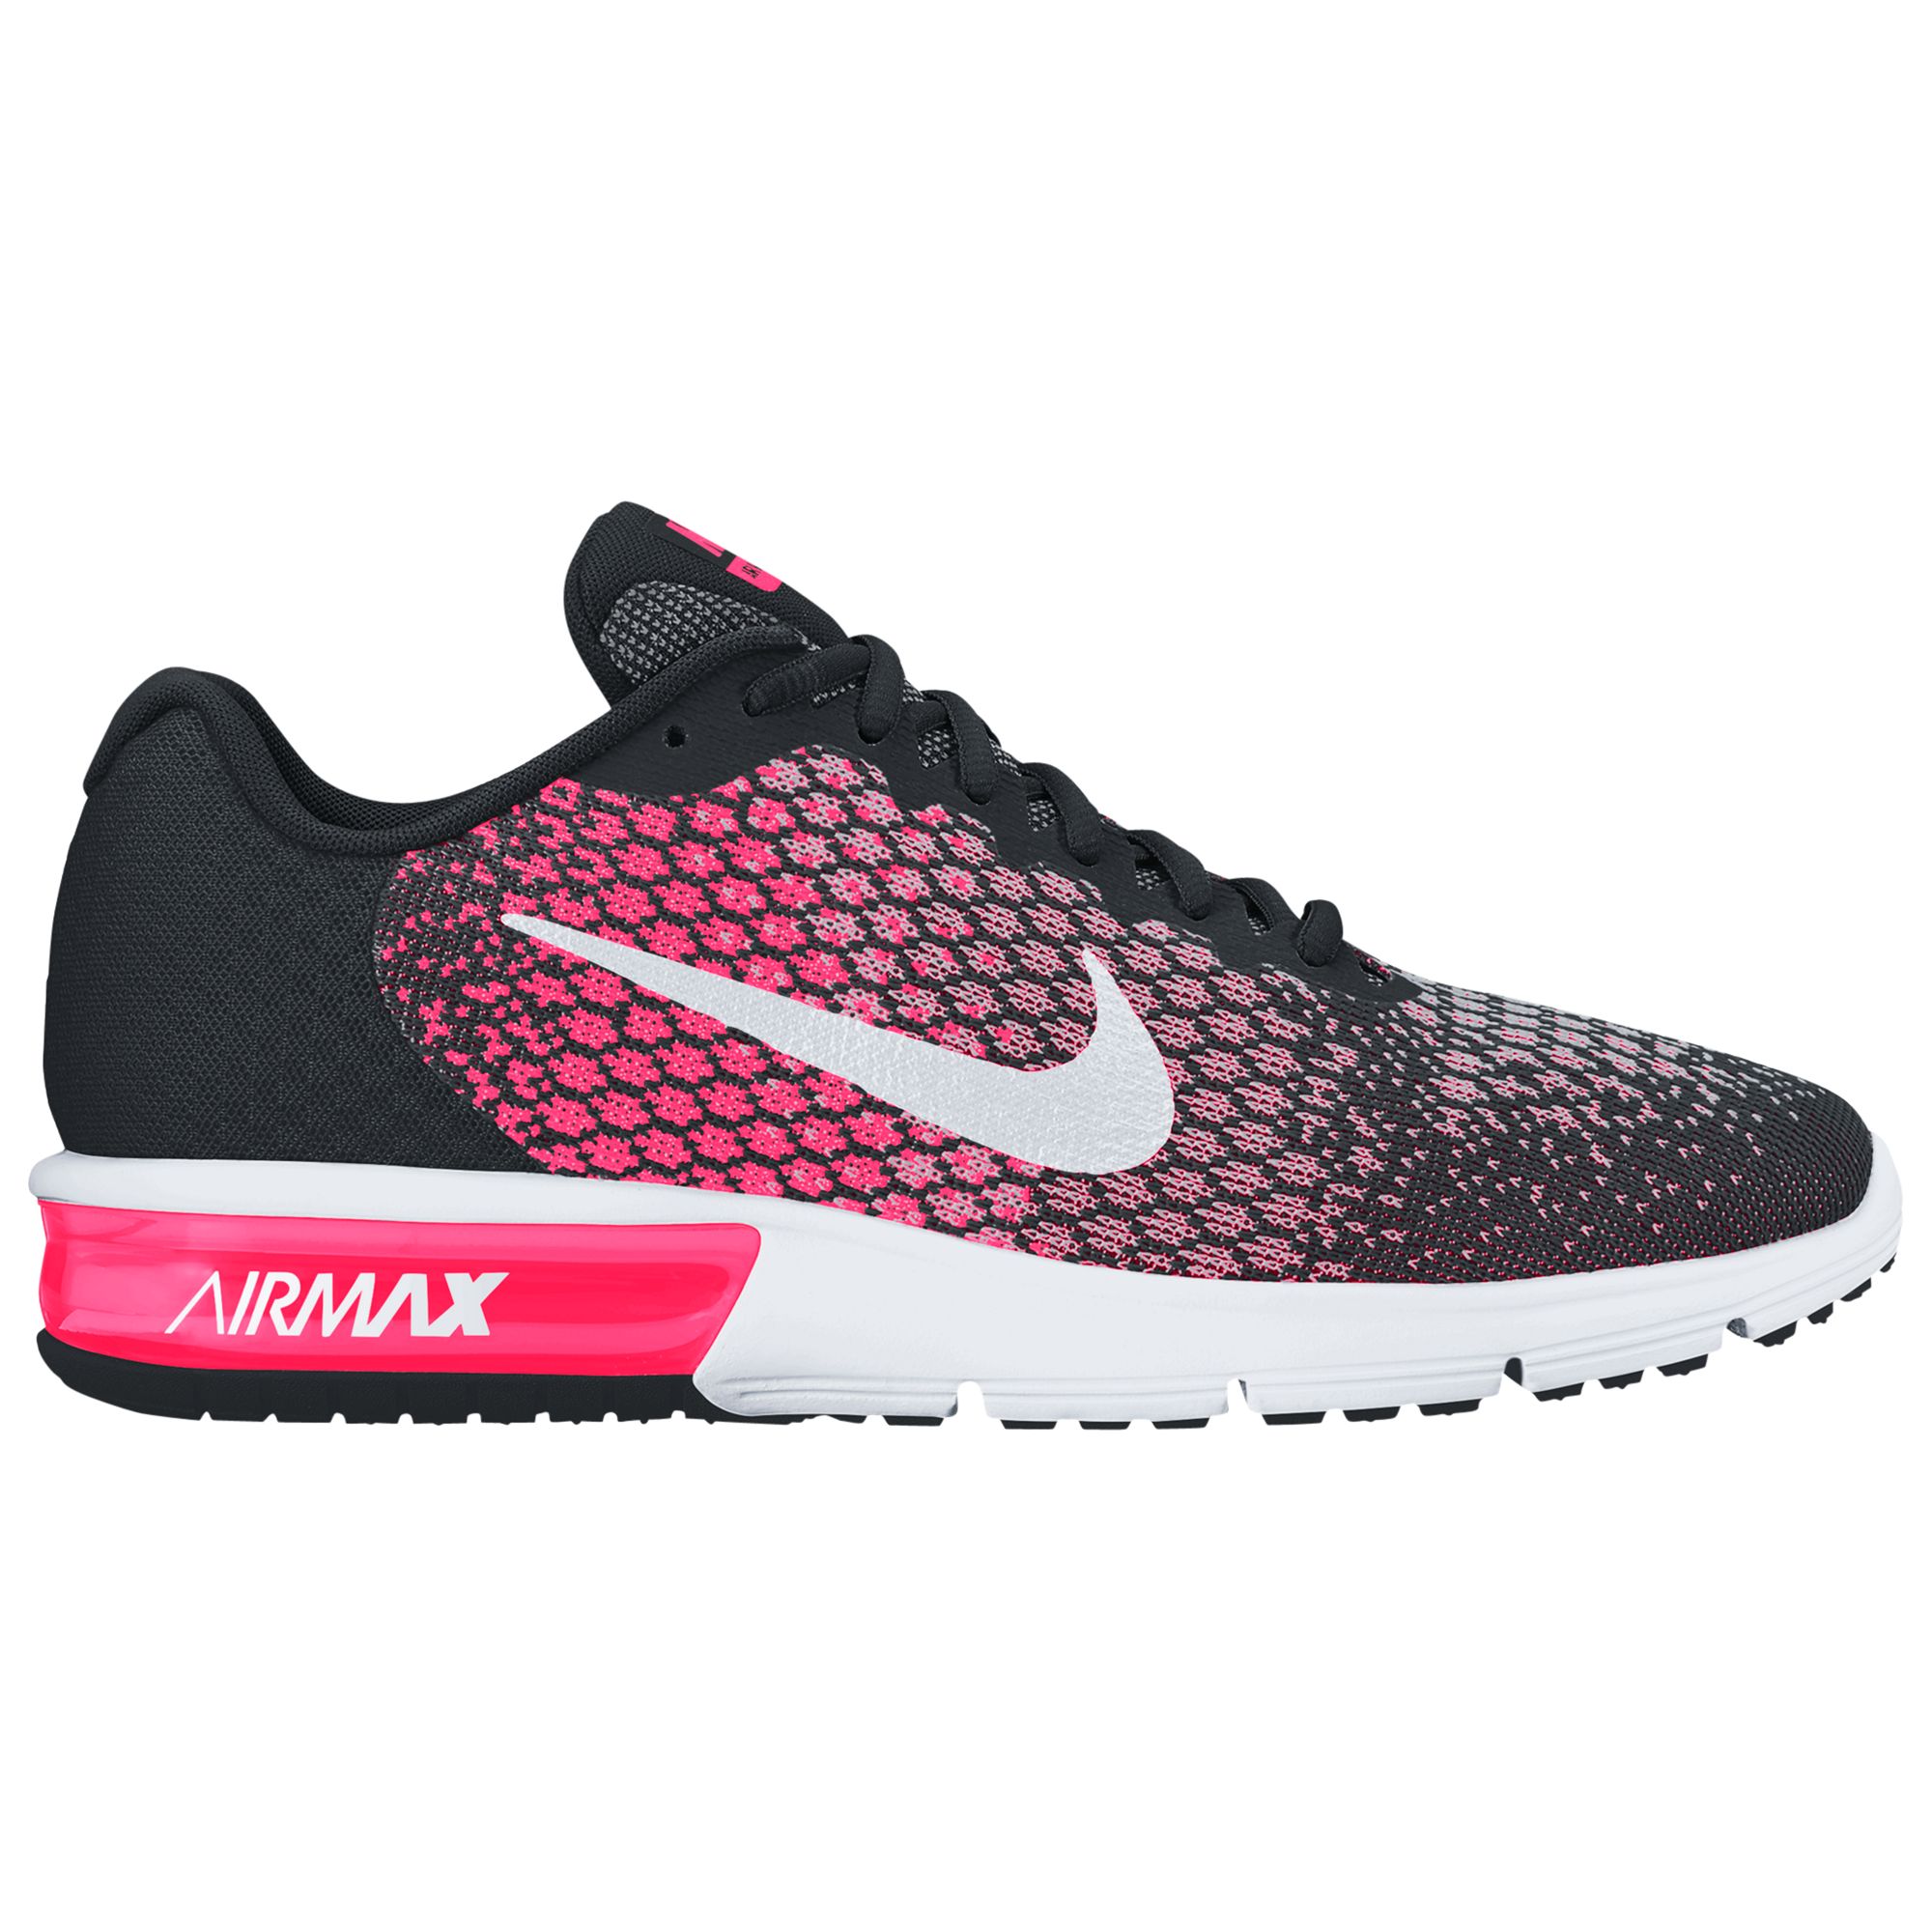 air max sequent pink